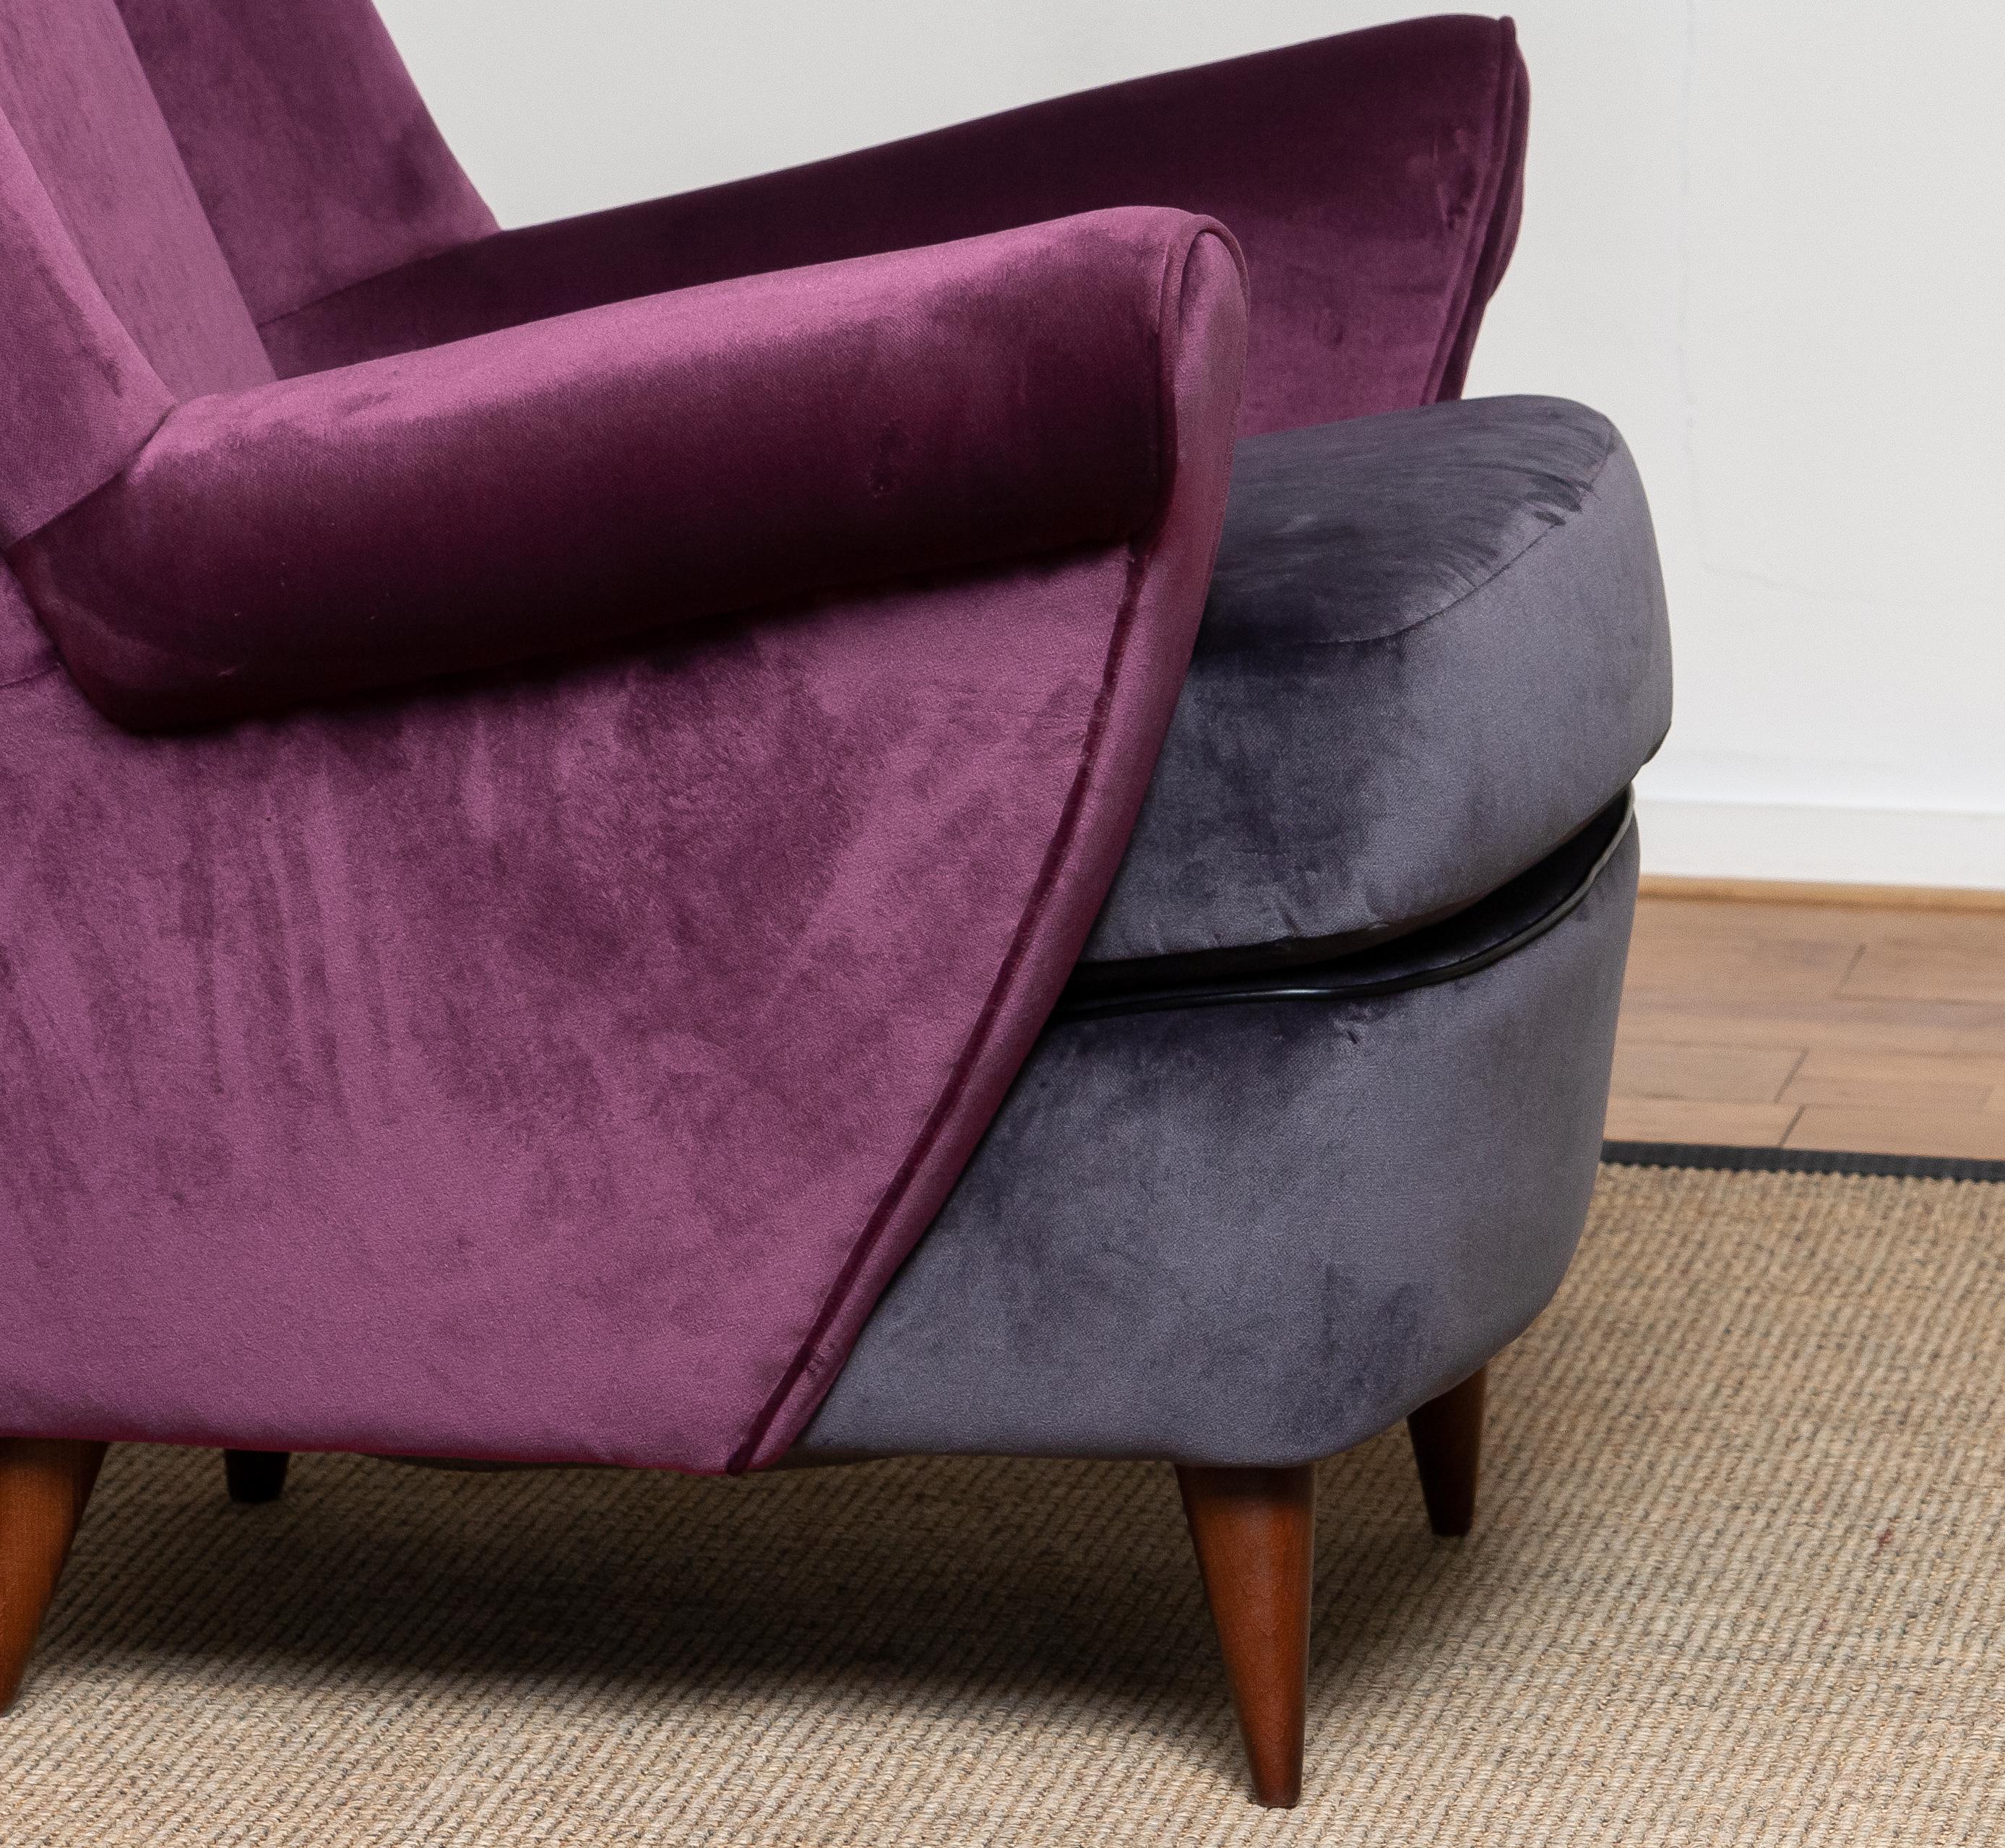 Mid-Century Modern 1950 Lounge / Easy Chair in Magenta by Designed Gio Ponti for ISA Bergamo, Italy